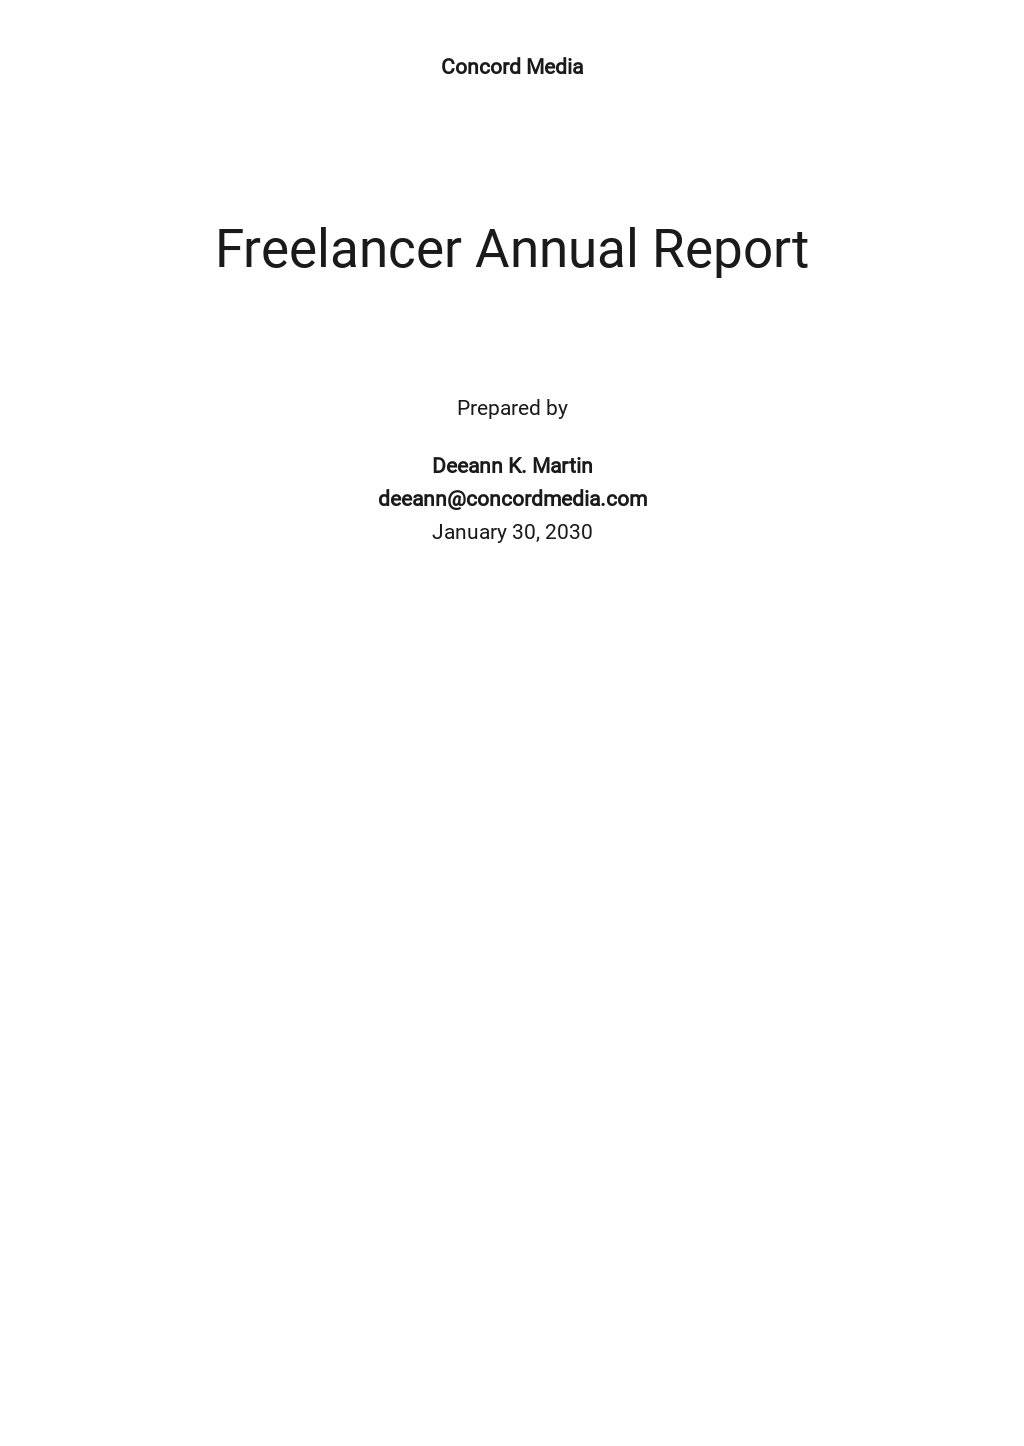 annual report word template free download